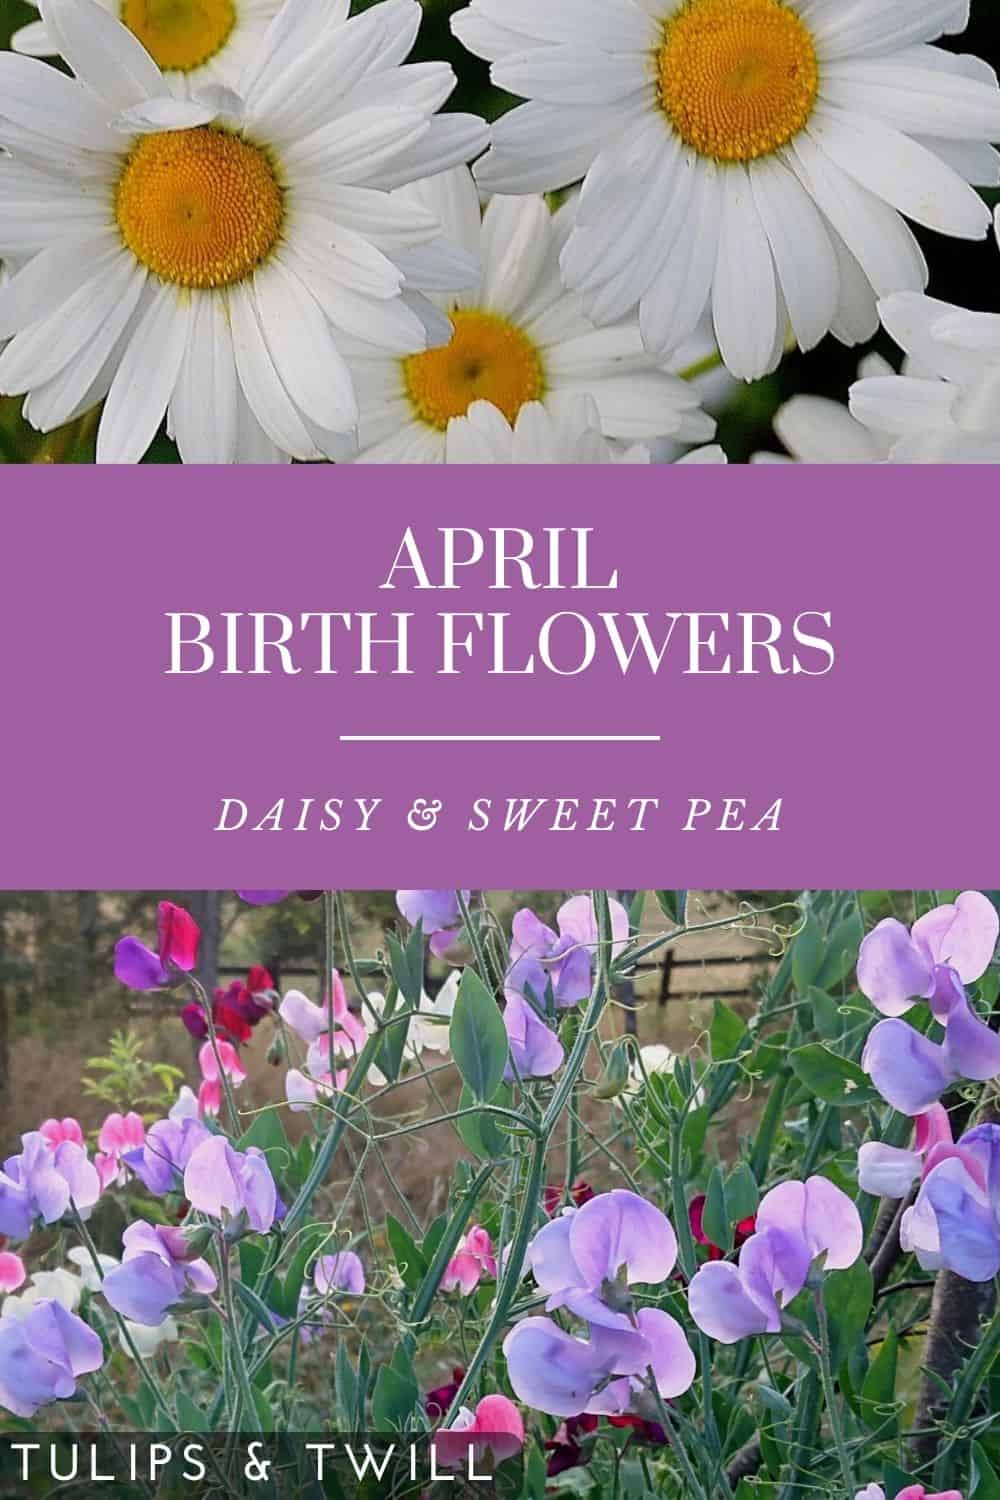 april birth month flower pinterest graphic with text stating the flowers and the flowers themselves